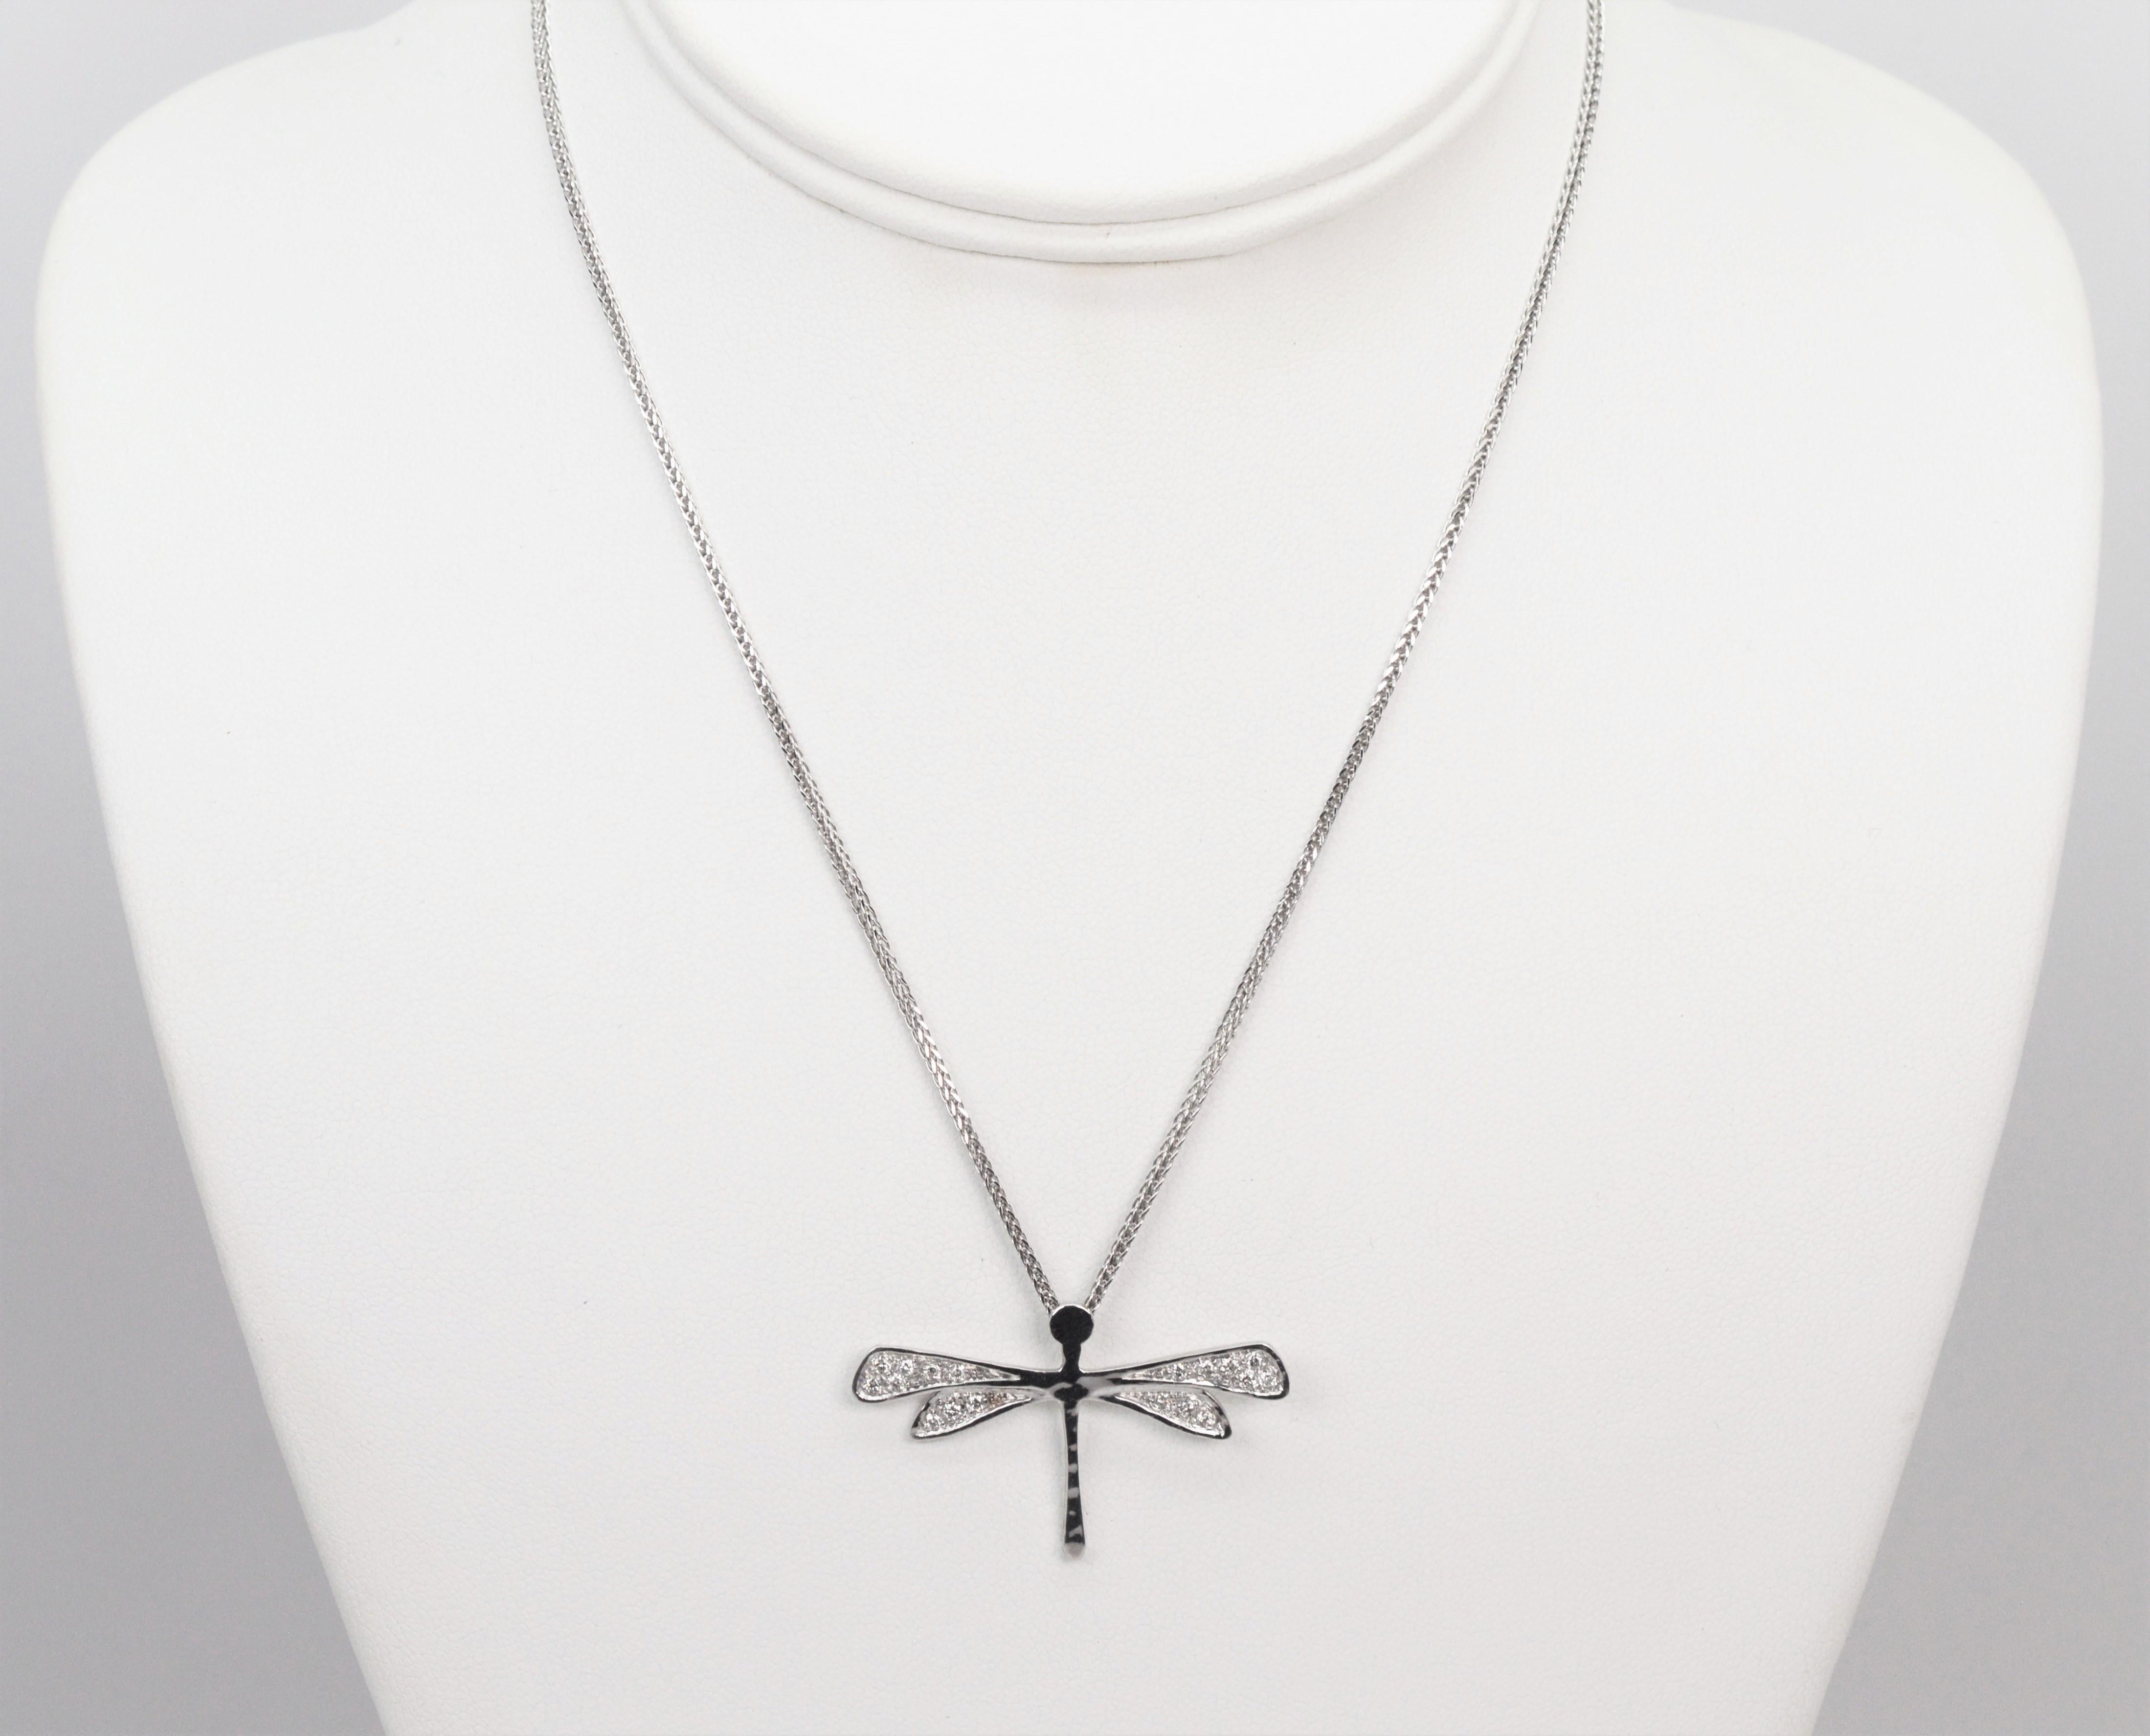 From Torrini's 1369 Renaissance Collection, pave diamonds sparkle on the wings of this adorable pendant necklace of fourteen karat 14k white gold. With a hand hammered finish, and 1.5 inch wing span, the pendant delicately floats on a 16 inch white